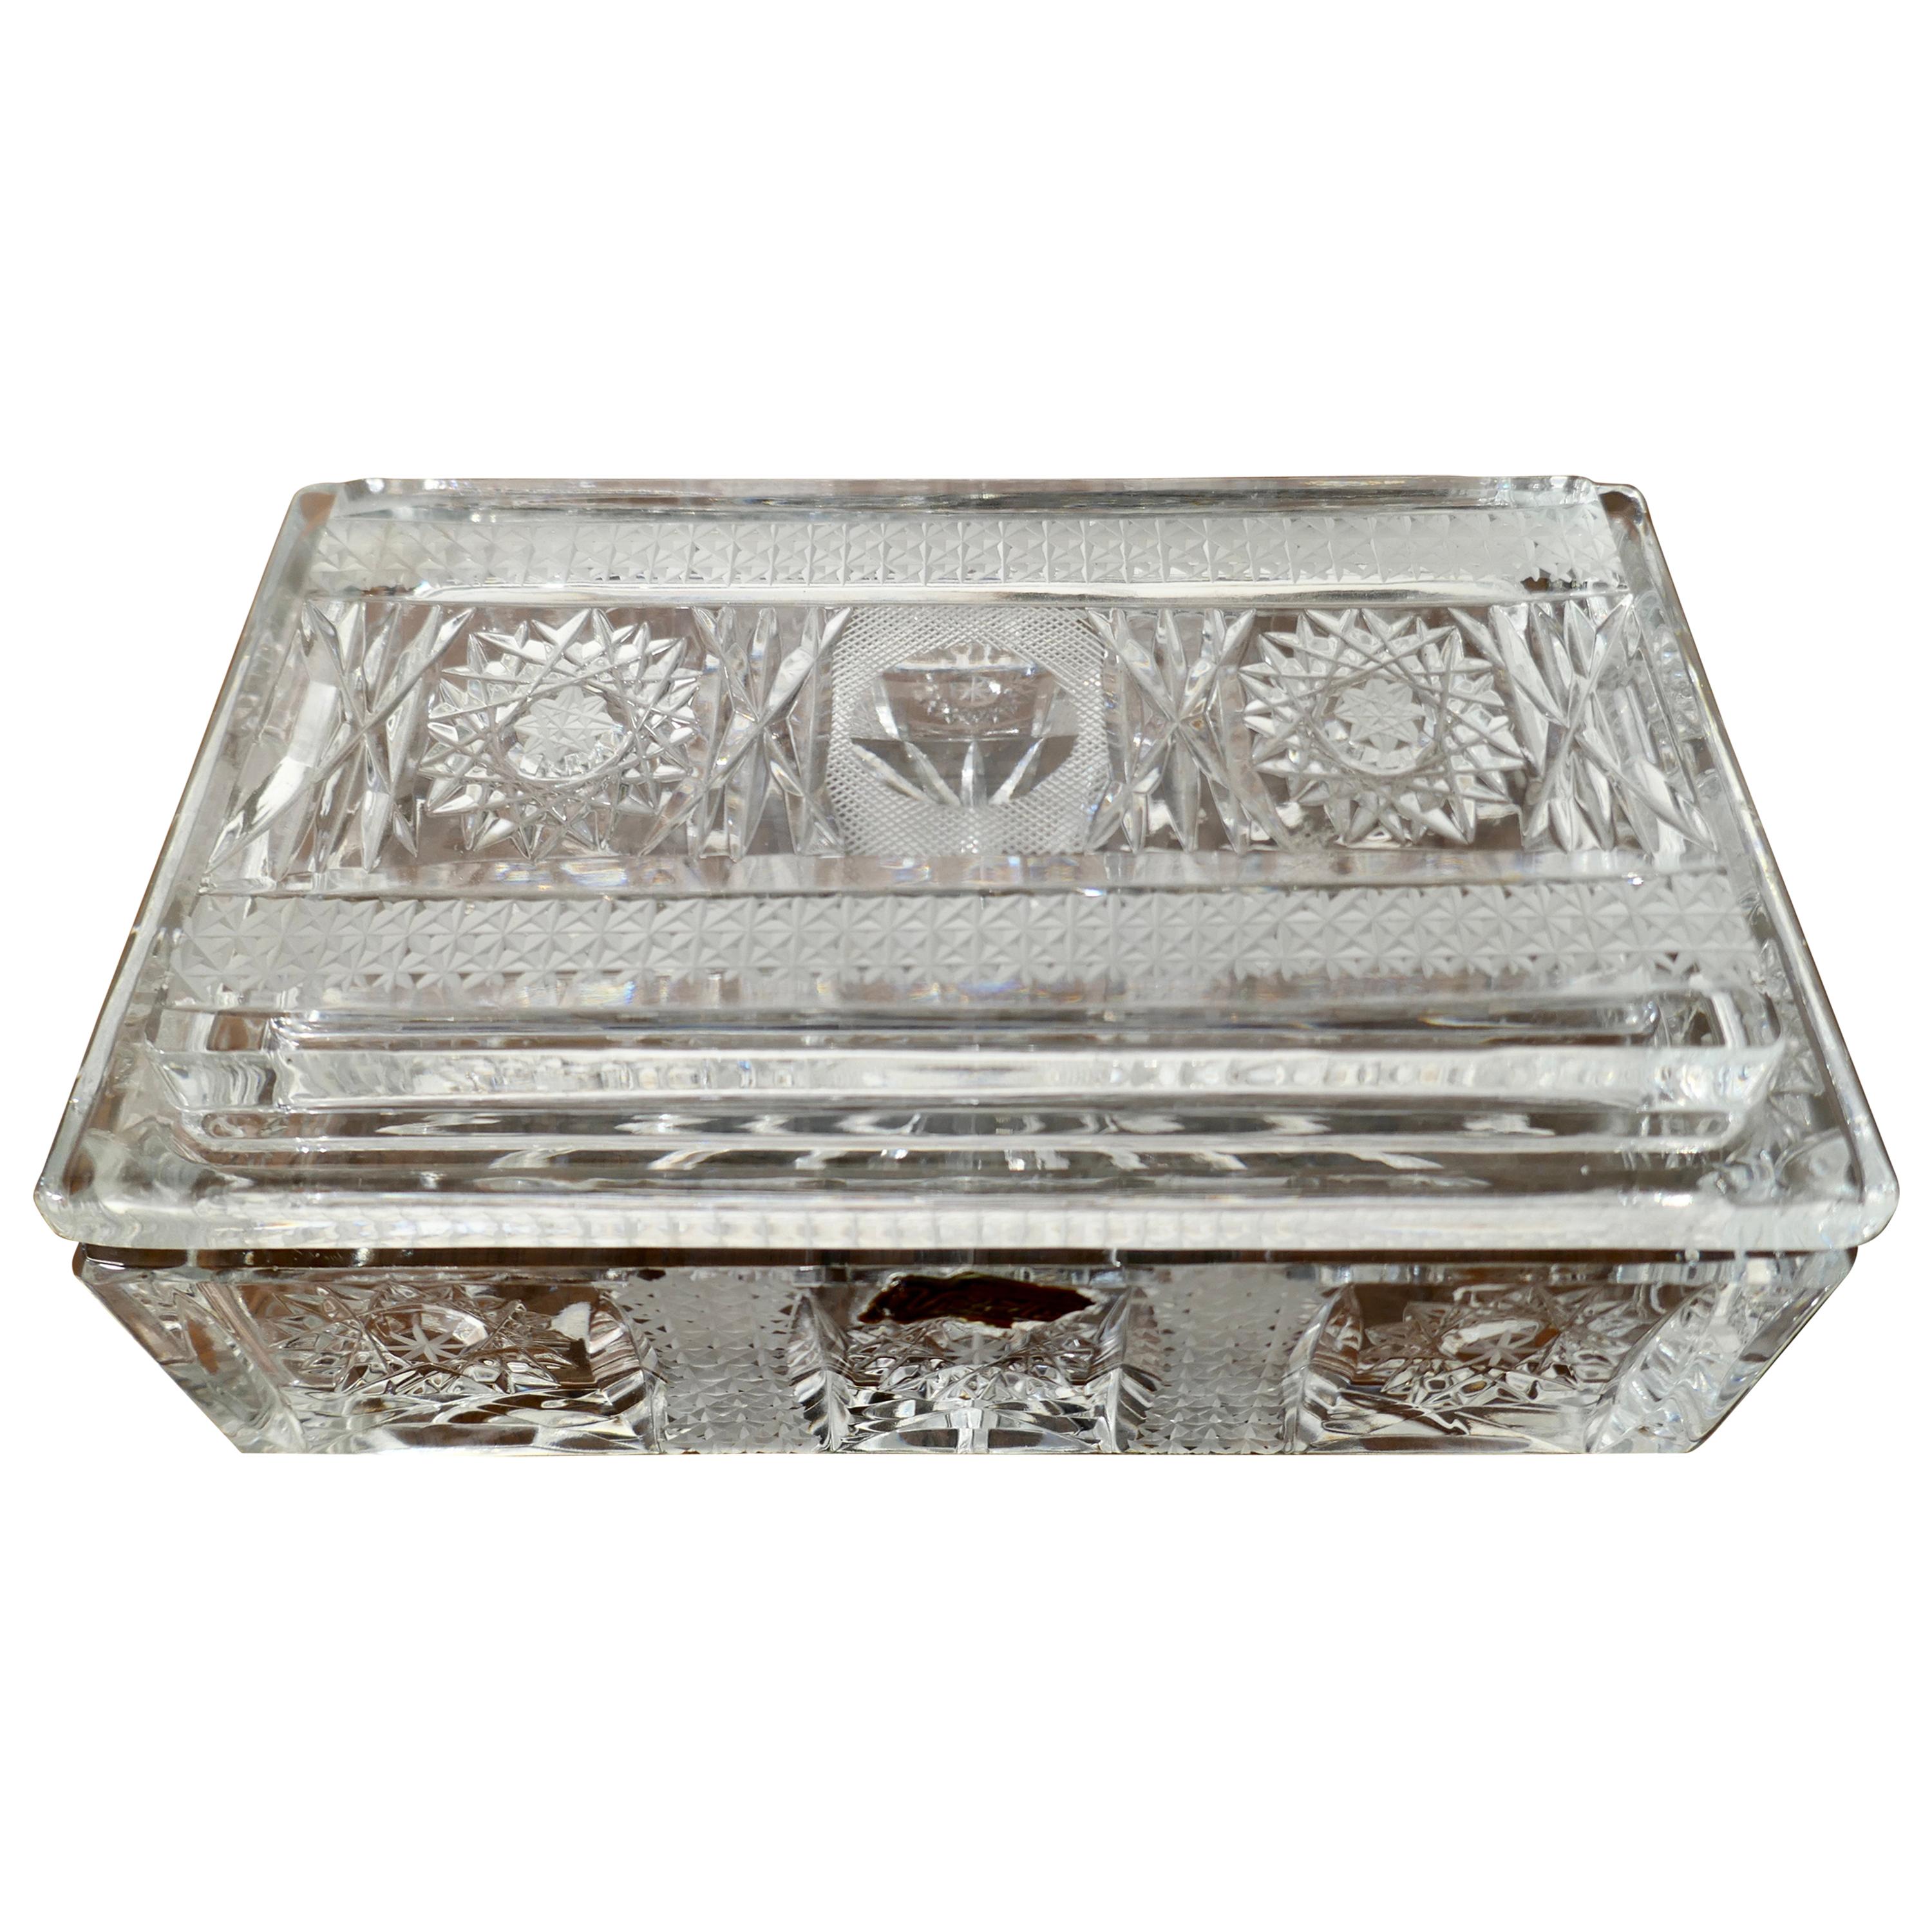 Beautiful Rectangular Star Cut Crystal Dish or Box with Cover